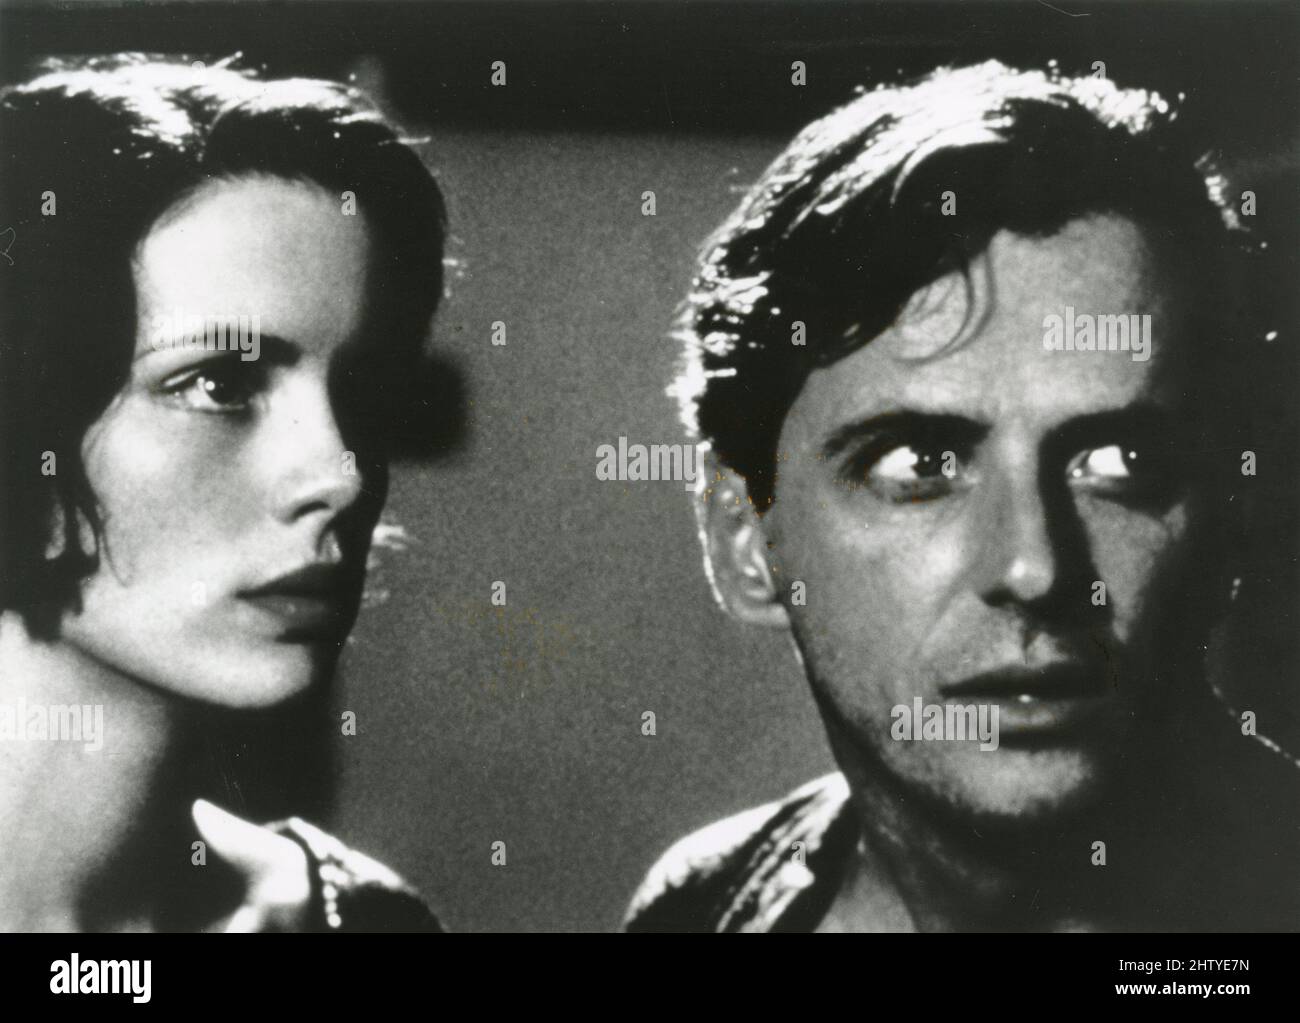 Actor Aidan Quinn and actress Kate Beckinsale in the movie Haunted, UK 1995 Stock Photo